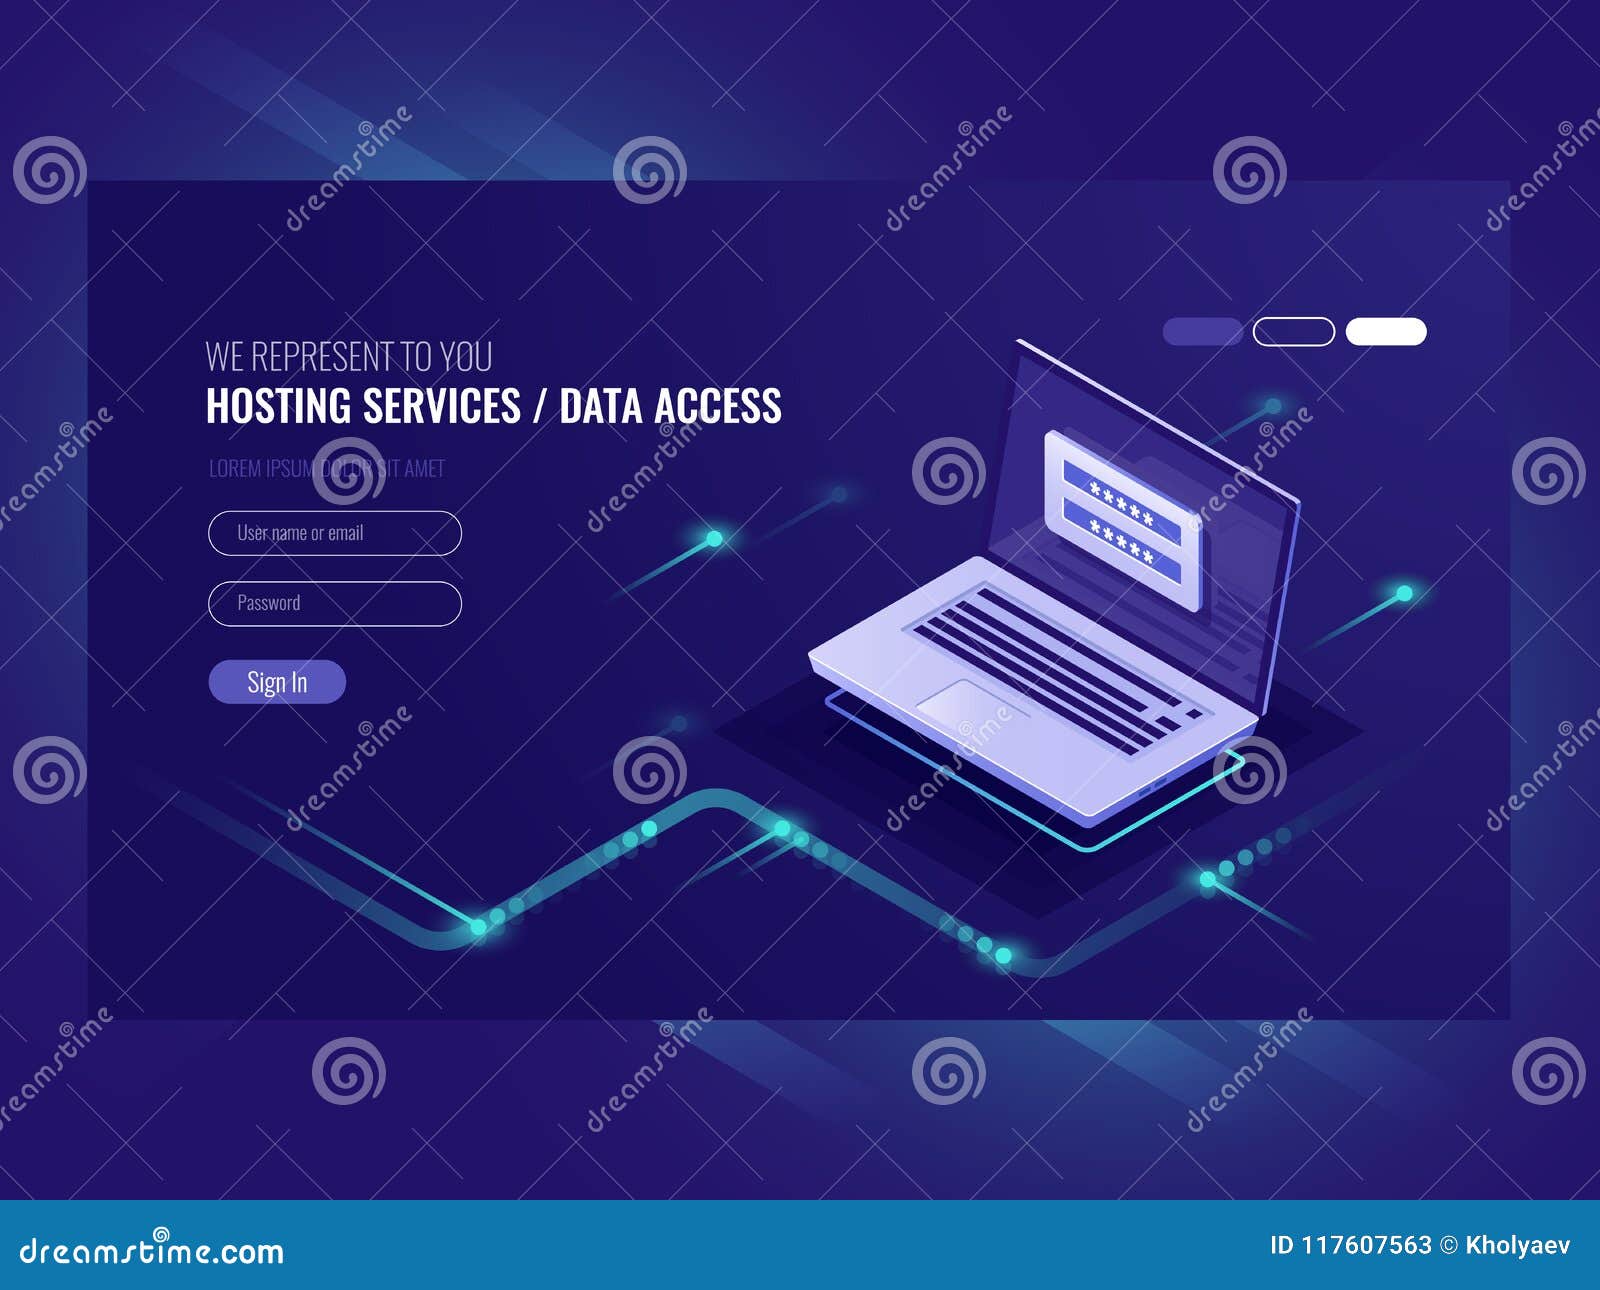 hosting services, user authorization form, login password, registration, laptop, network data access isometric 